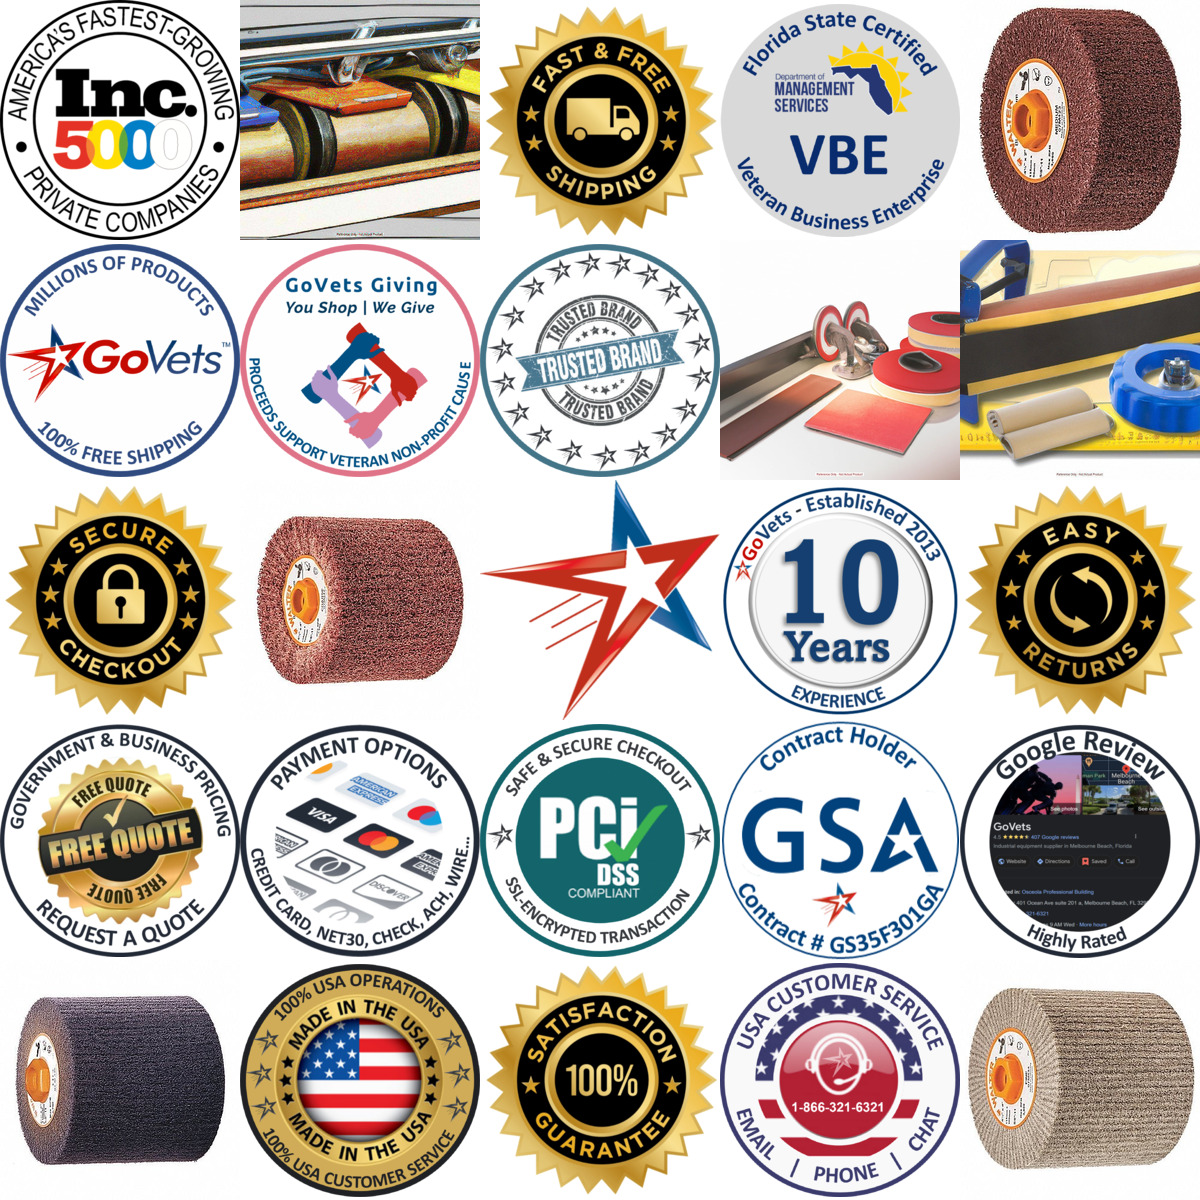 A selection of Sanding Belt Kits products on GoVets